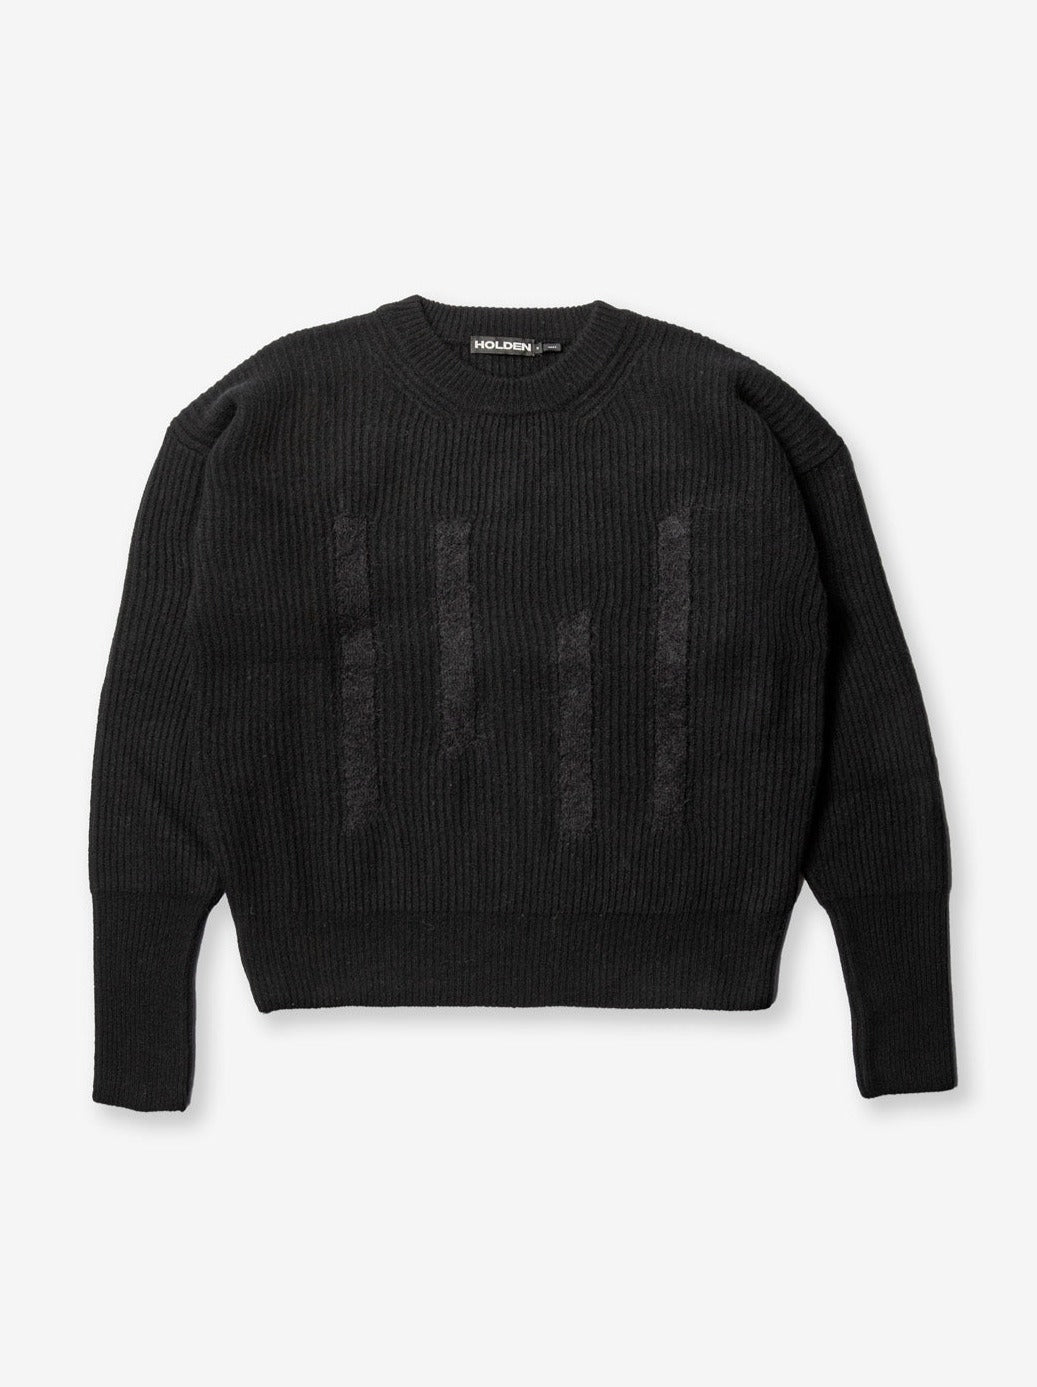 Woman WOOL ICON SWEATER - Black - flat lay - front